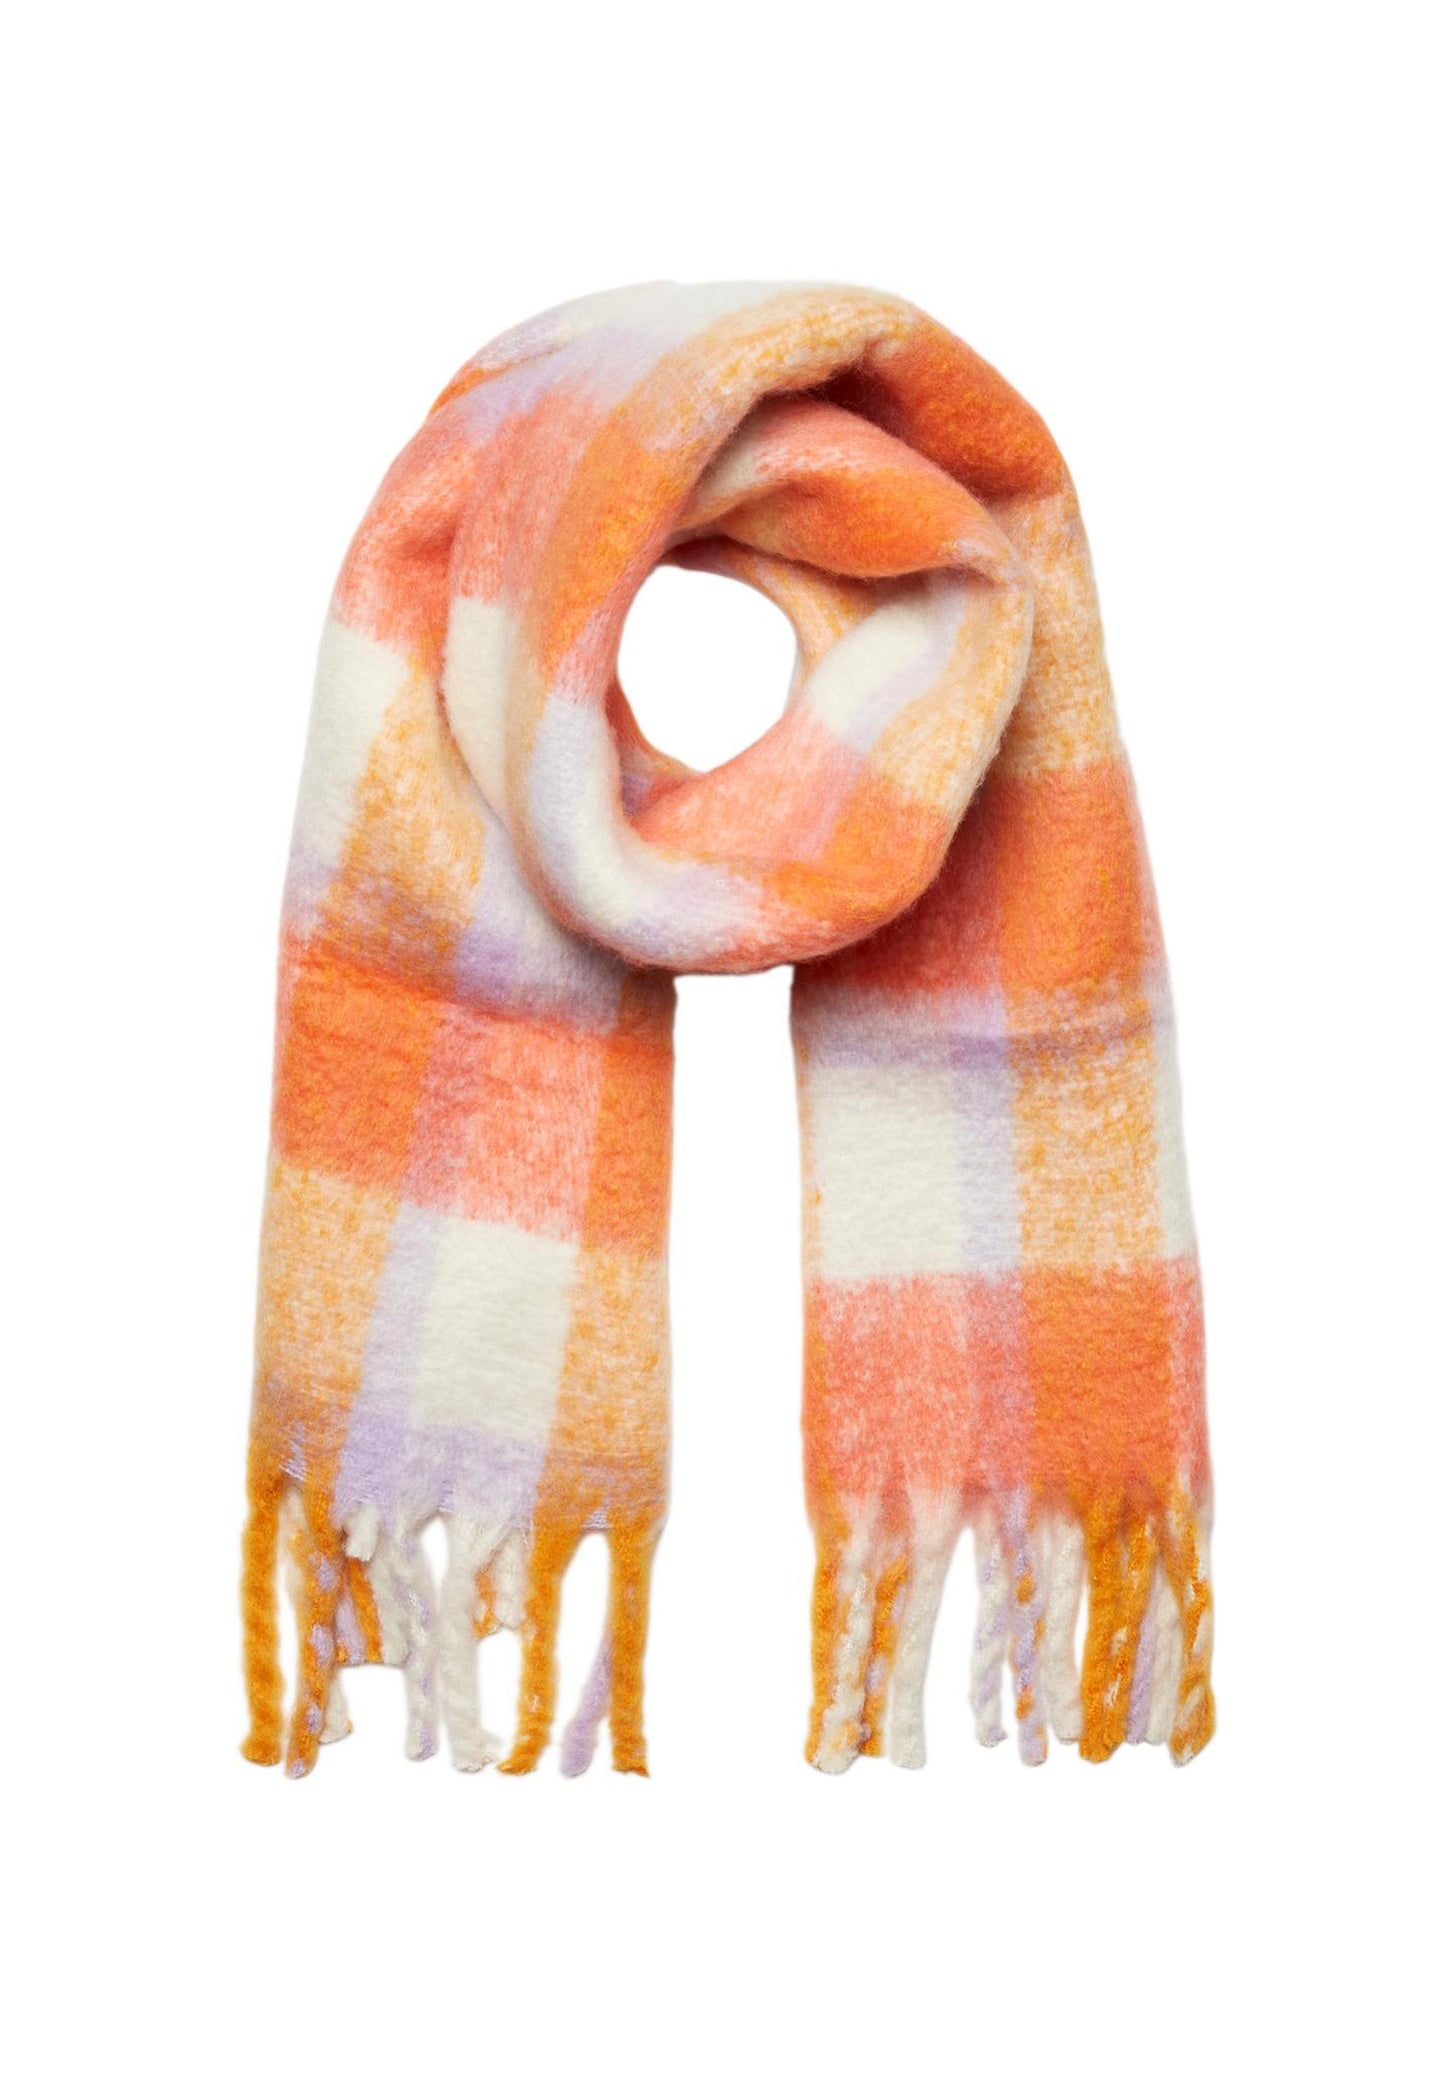 VERO MODA Oversized Brushed Check Scarf with Tassels in Orange & Lilac - concretebartops